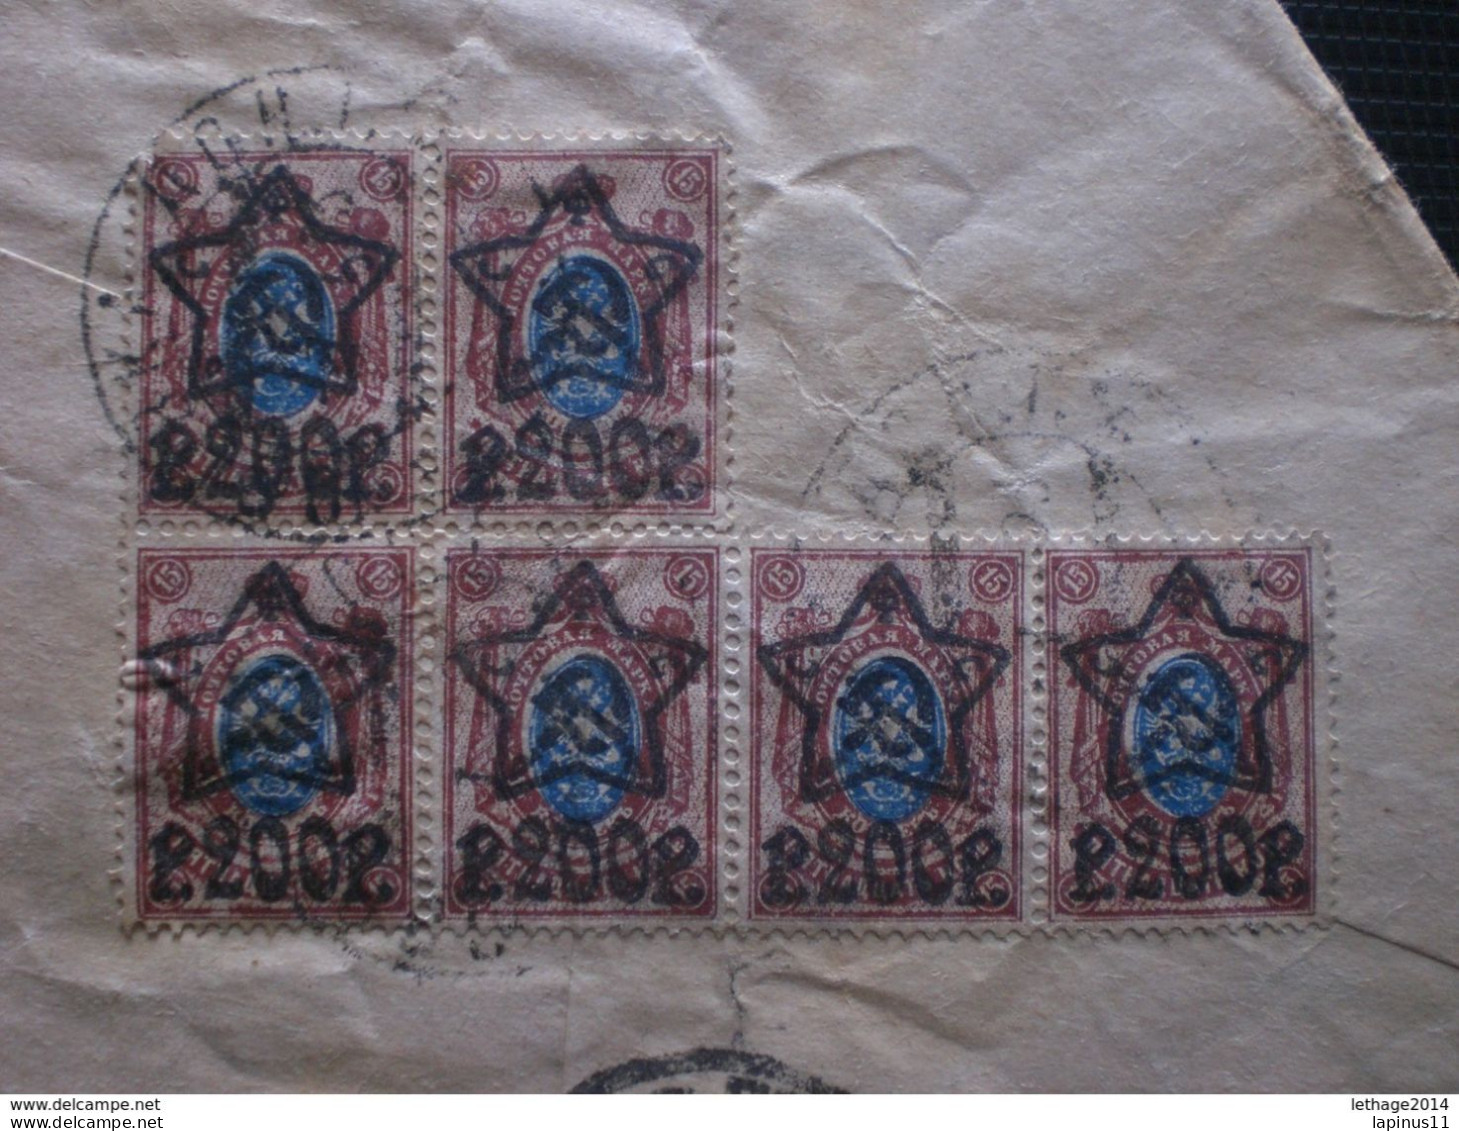 RUSSIA RUSSIE РОССИЯ STAMPS COVER 1923 RUSSIE TO ITALY FULL STAMPS RRR RIF.TAGG. (79) - Covers & Documents